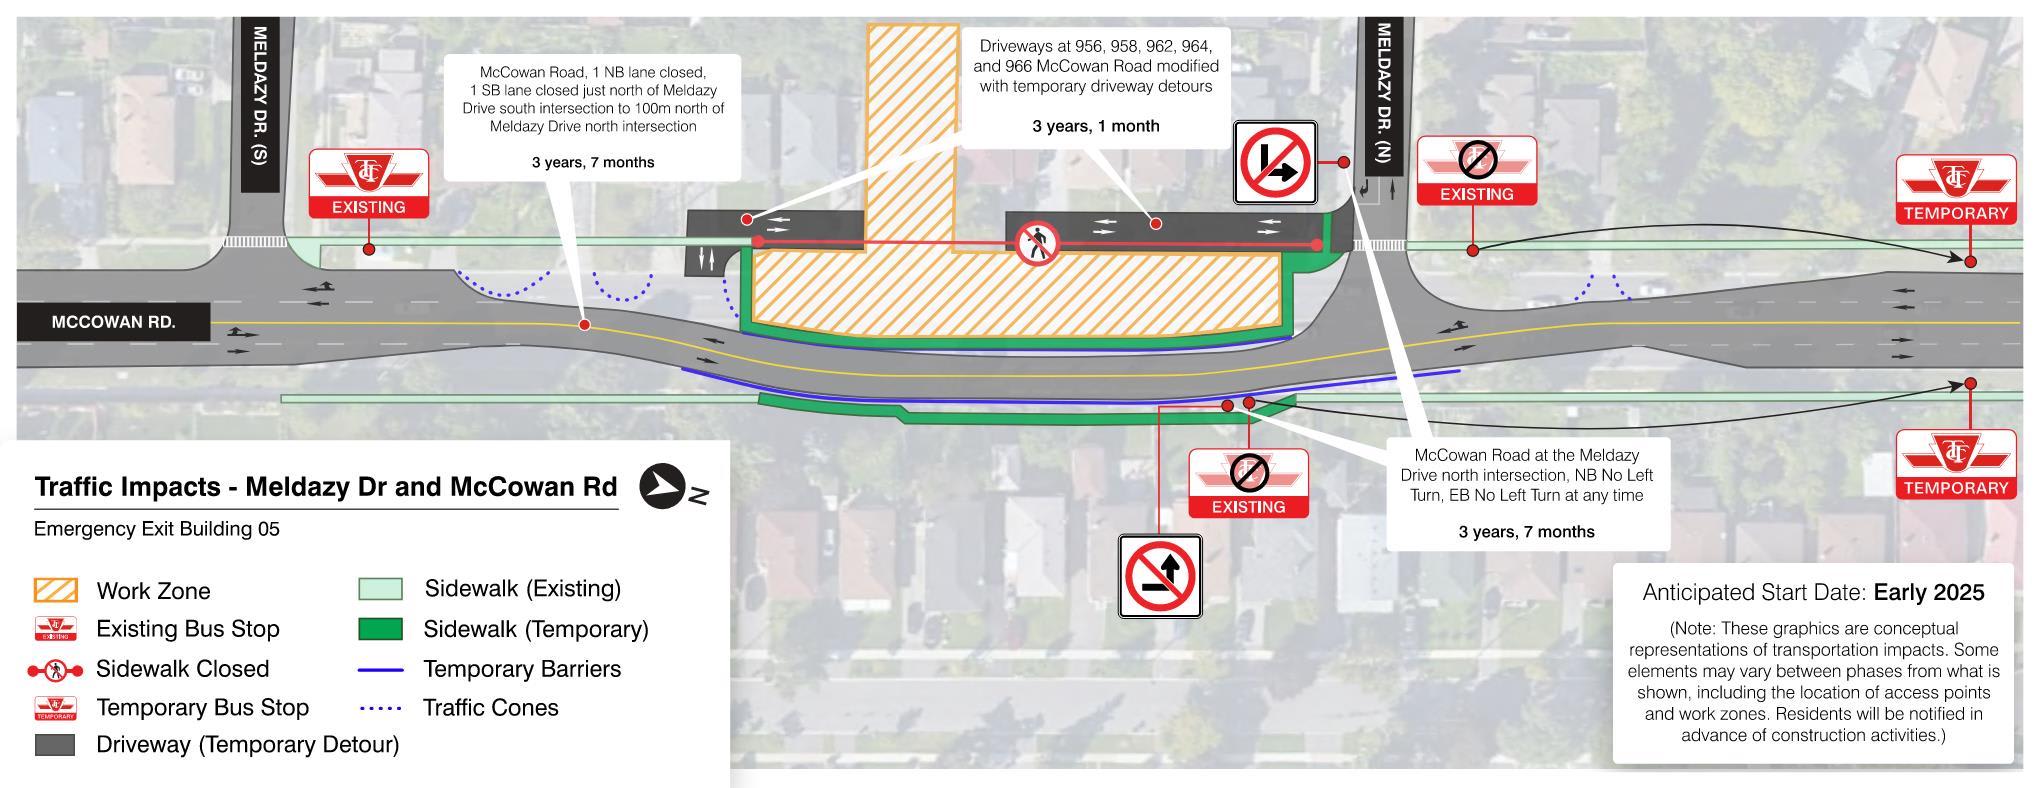 Meldazy Dr – traffic management plan showing driveway closures and other impacts near Meldazy D...